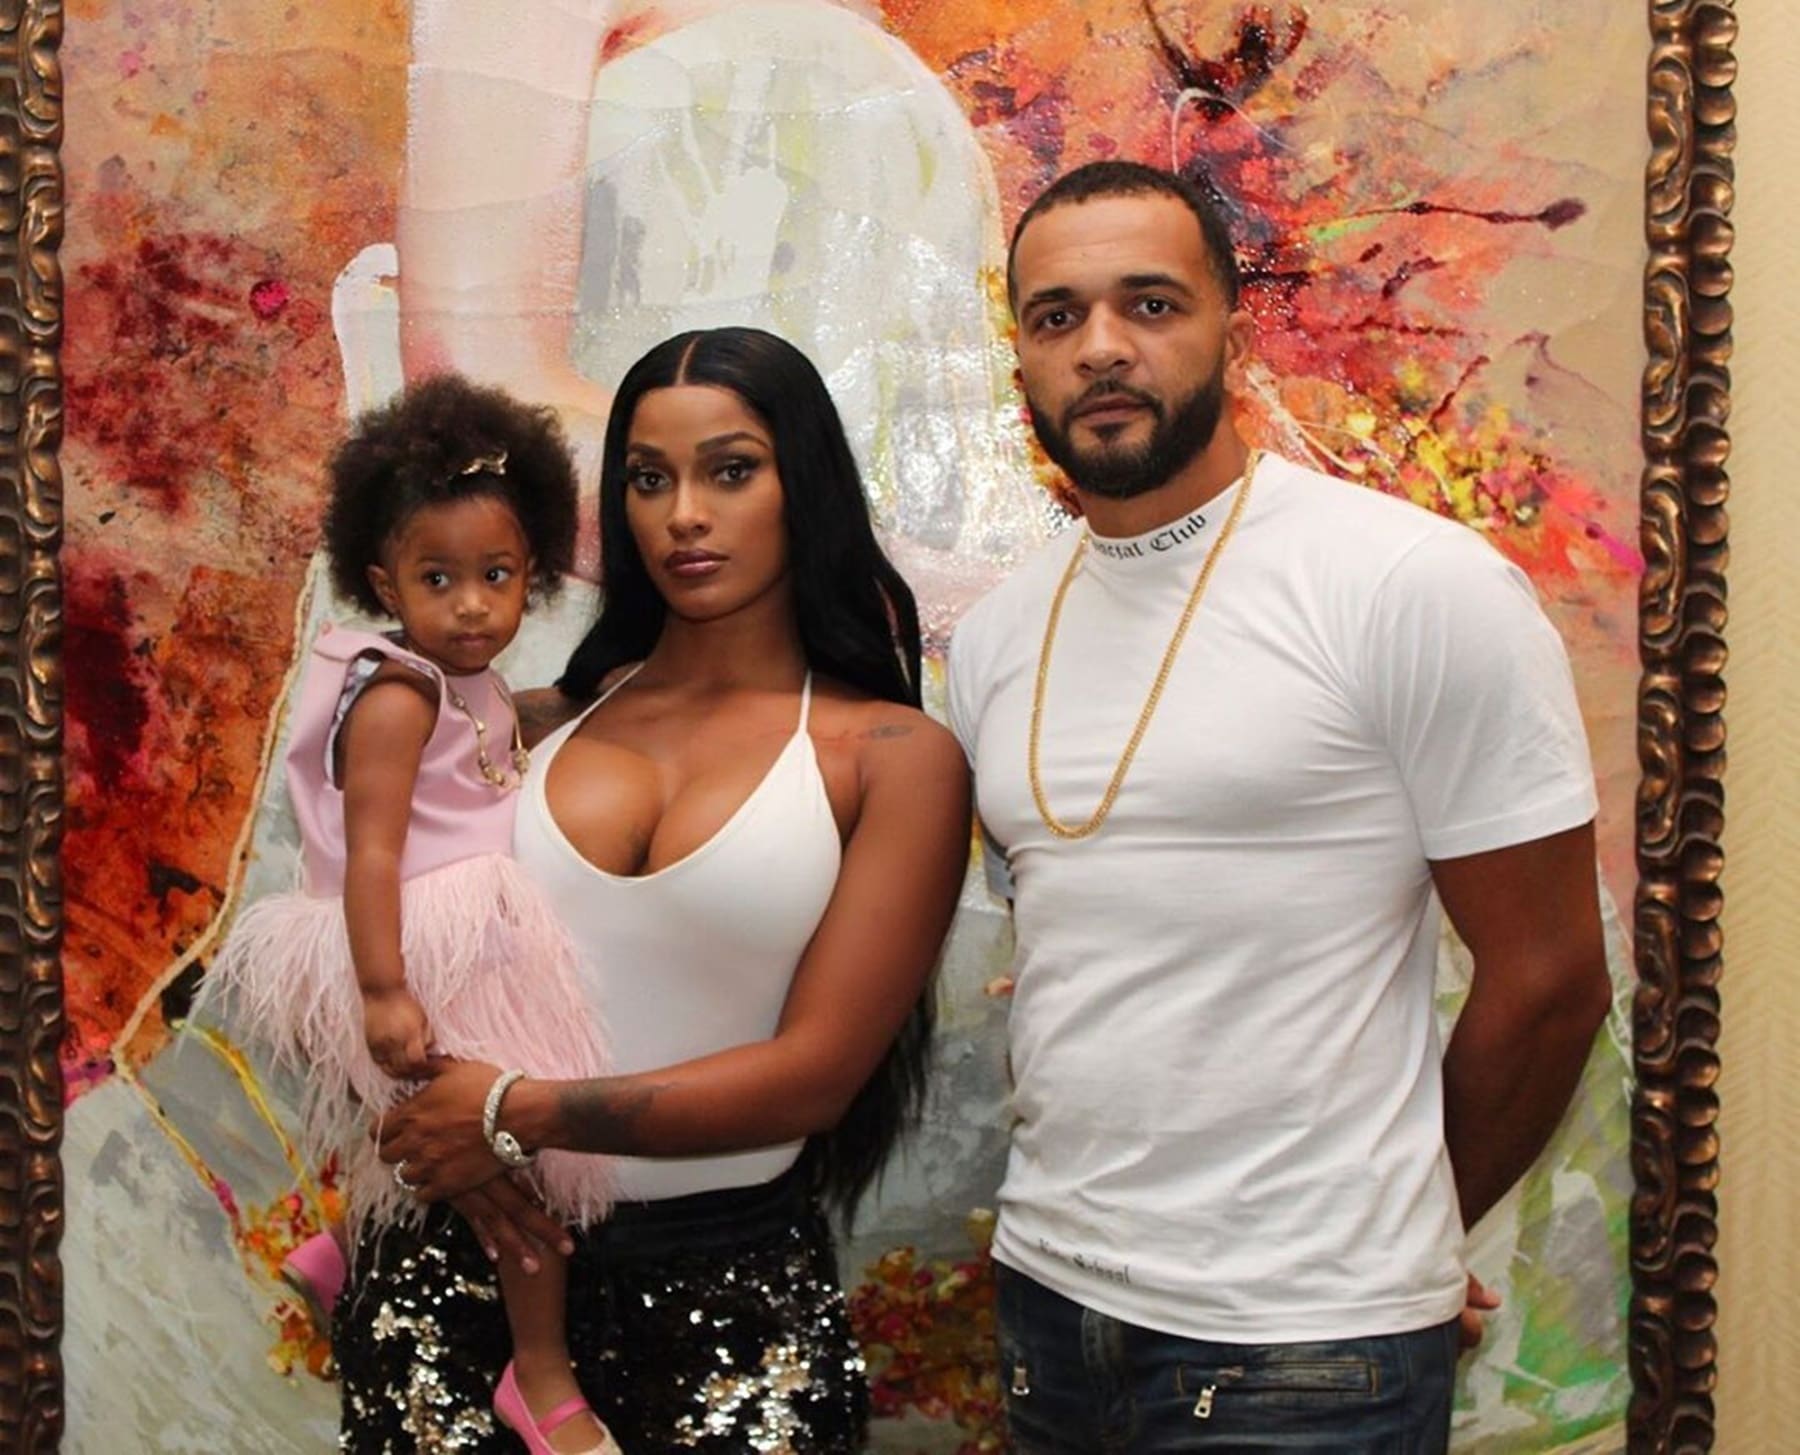 A glowing Joseline Hernandez has decided to flaunt her love and newfound ha...